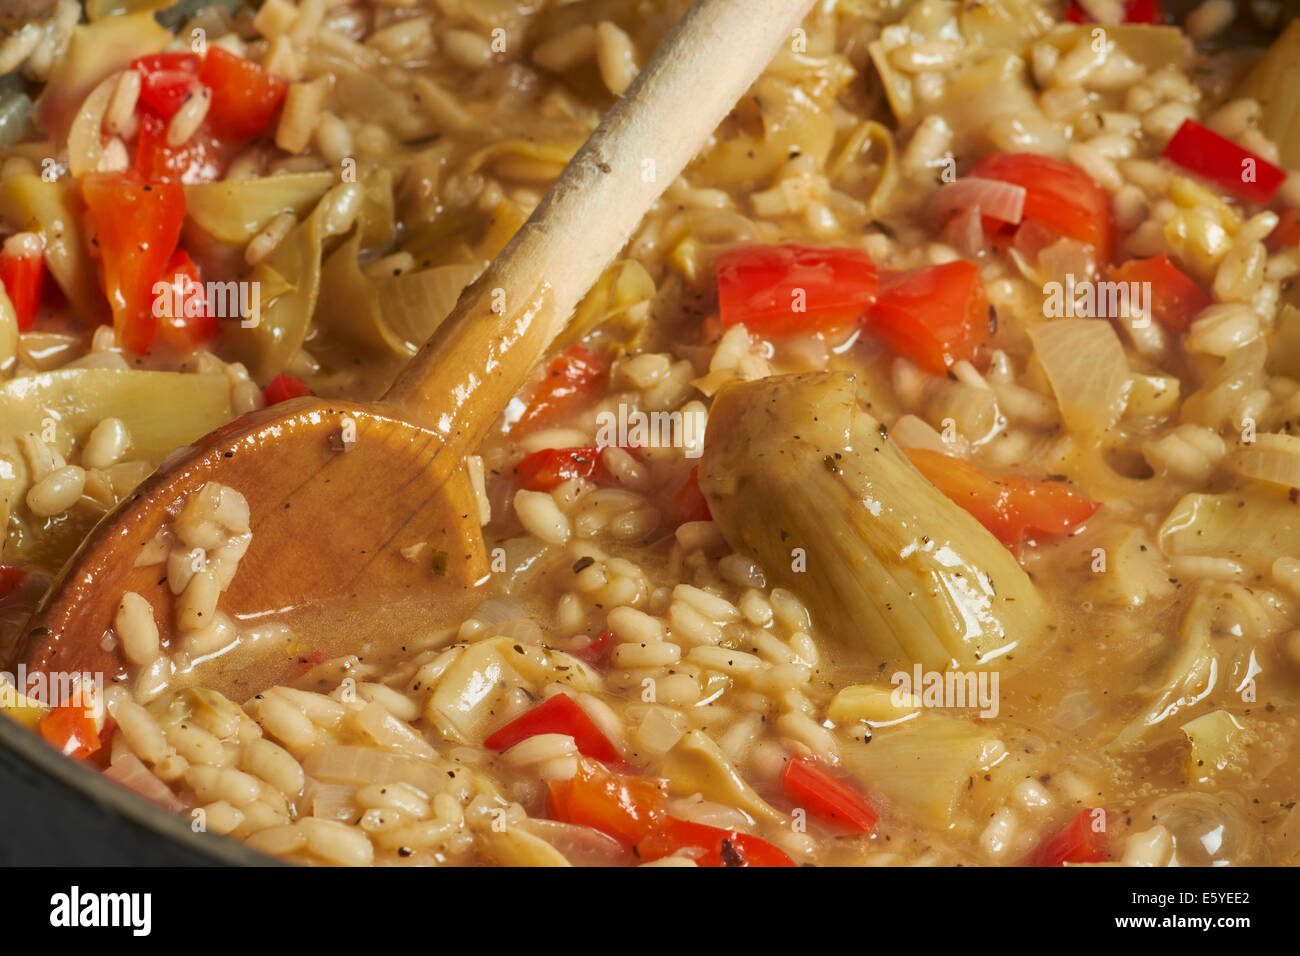 Risotto with artichokes and red peppers Stock Photo